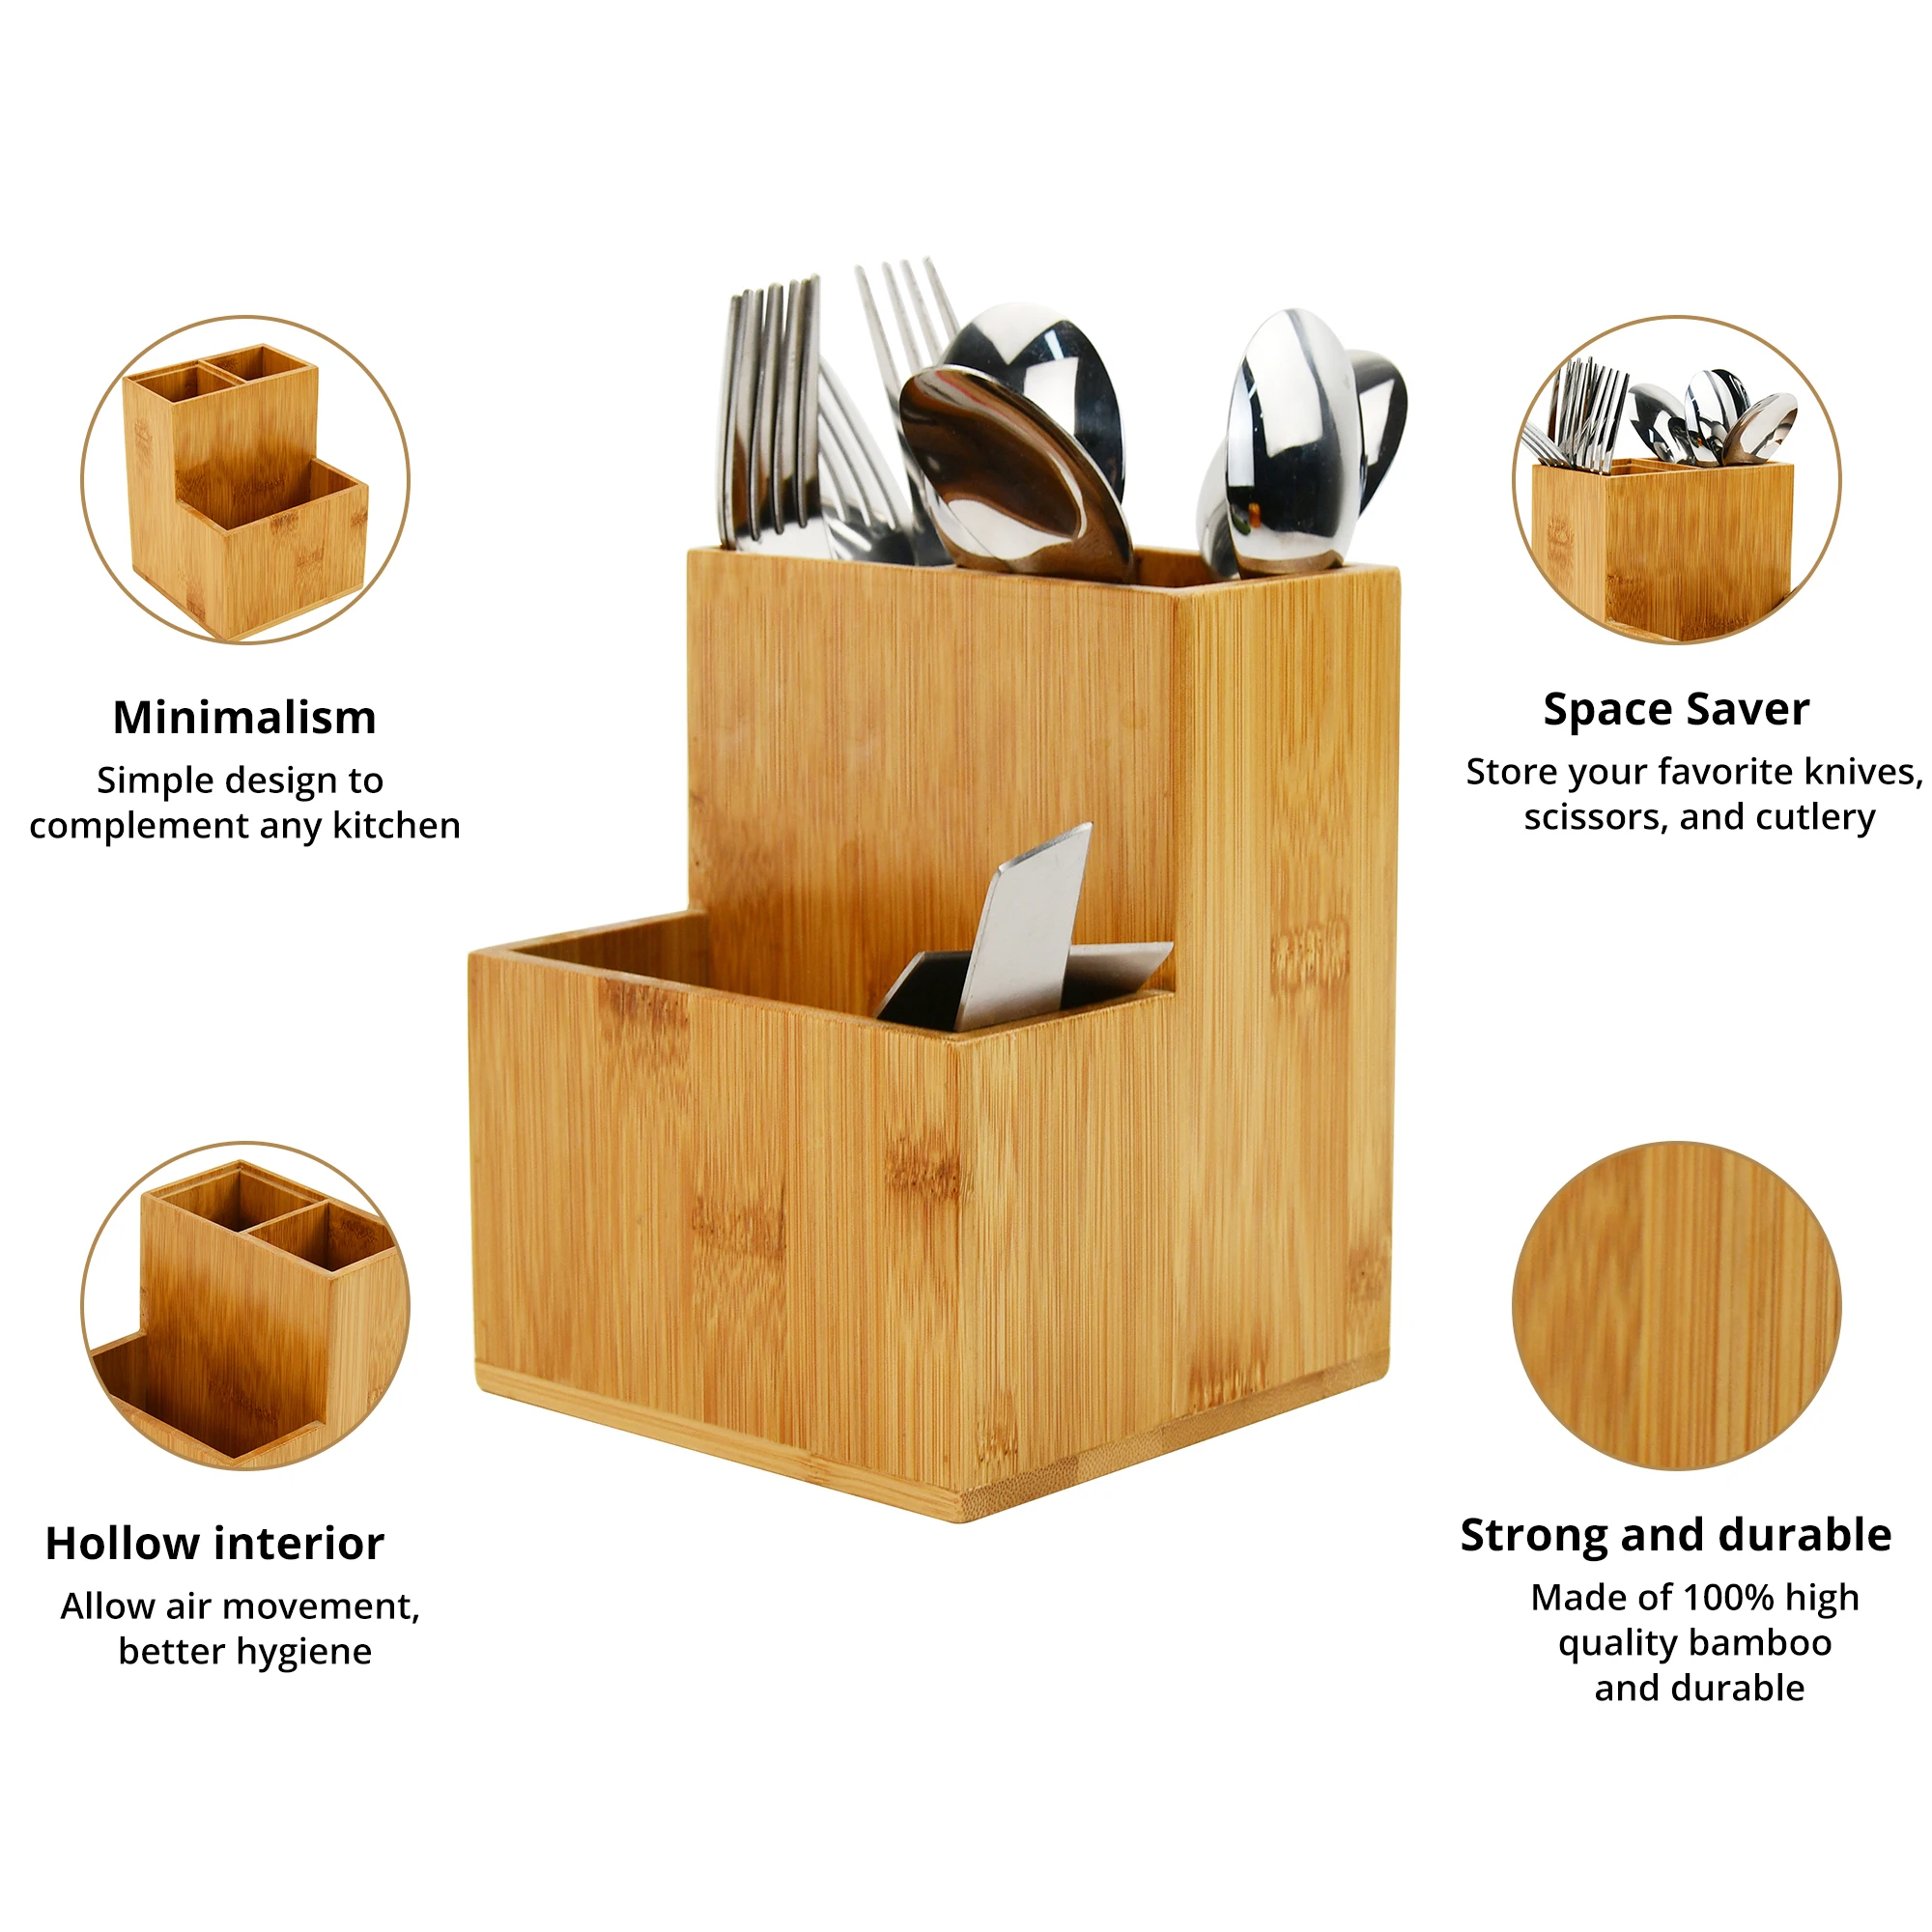 Premium Wooden Bamboo Kitchen Cooking Utensil Set With Holder Chopstick Organizer Stationary For Kitchen Counter